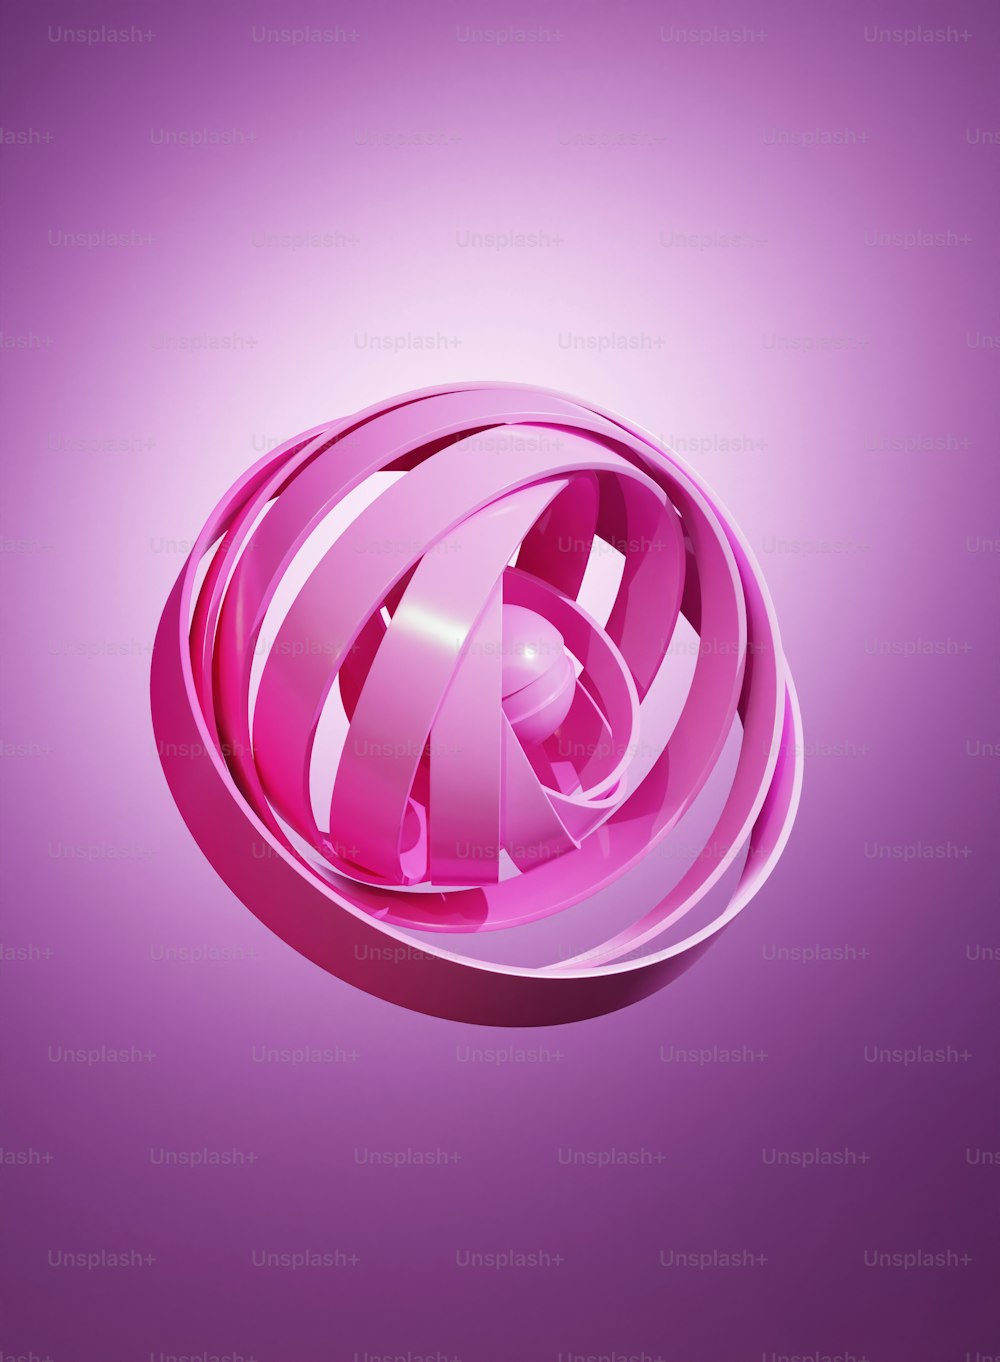 a pink circular object on a purple background